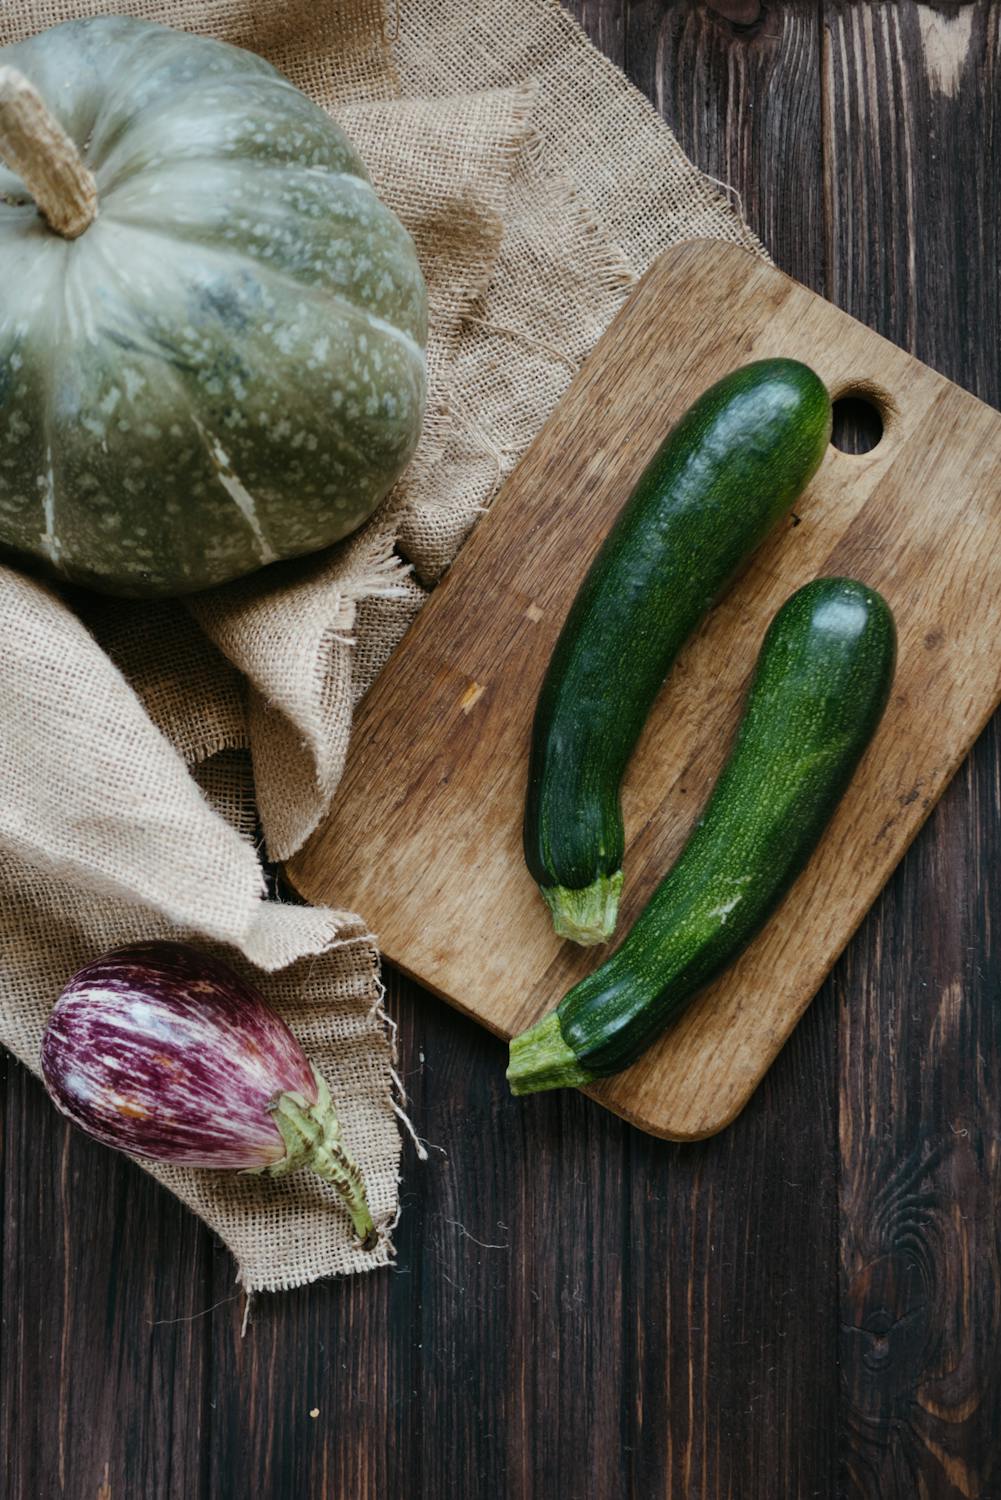 Green Cucumber and Green Vegetable on Brown Wooden Table · Free Stock Photo